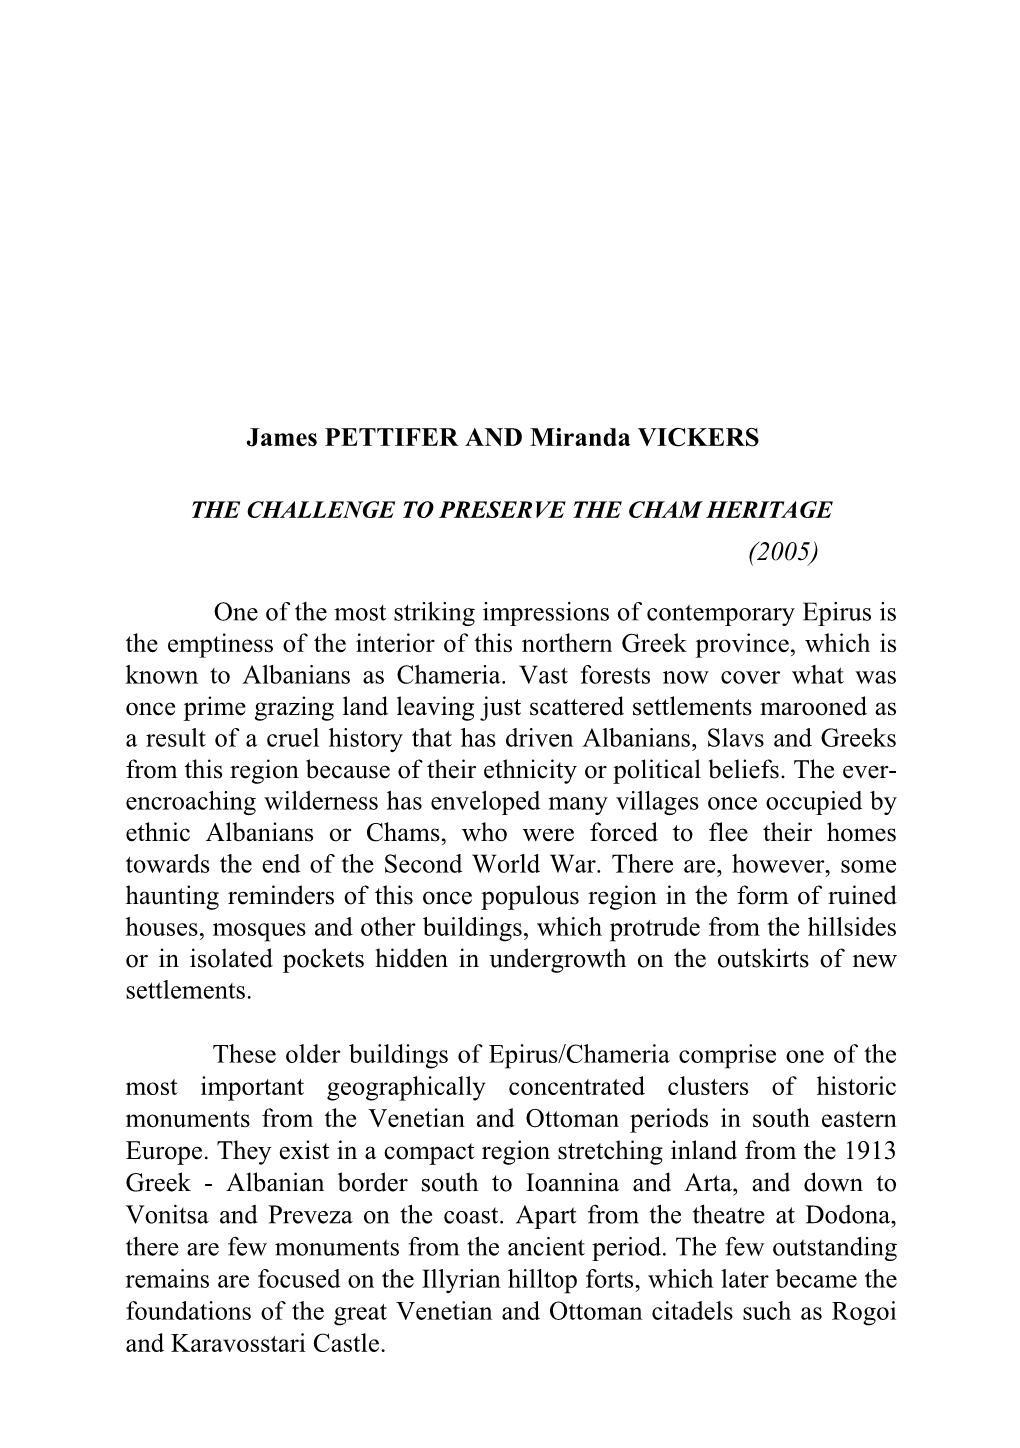 James PETTIFER and Miranda VICKERS (2005) One of the Most Striking Impressions of Contemporary Epirus Is the Emptiness of the In